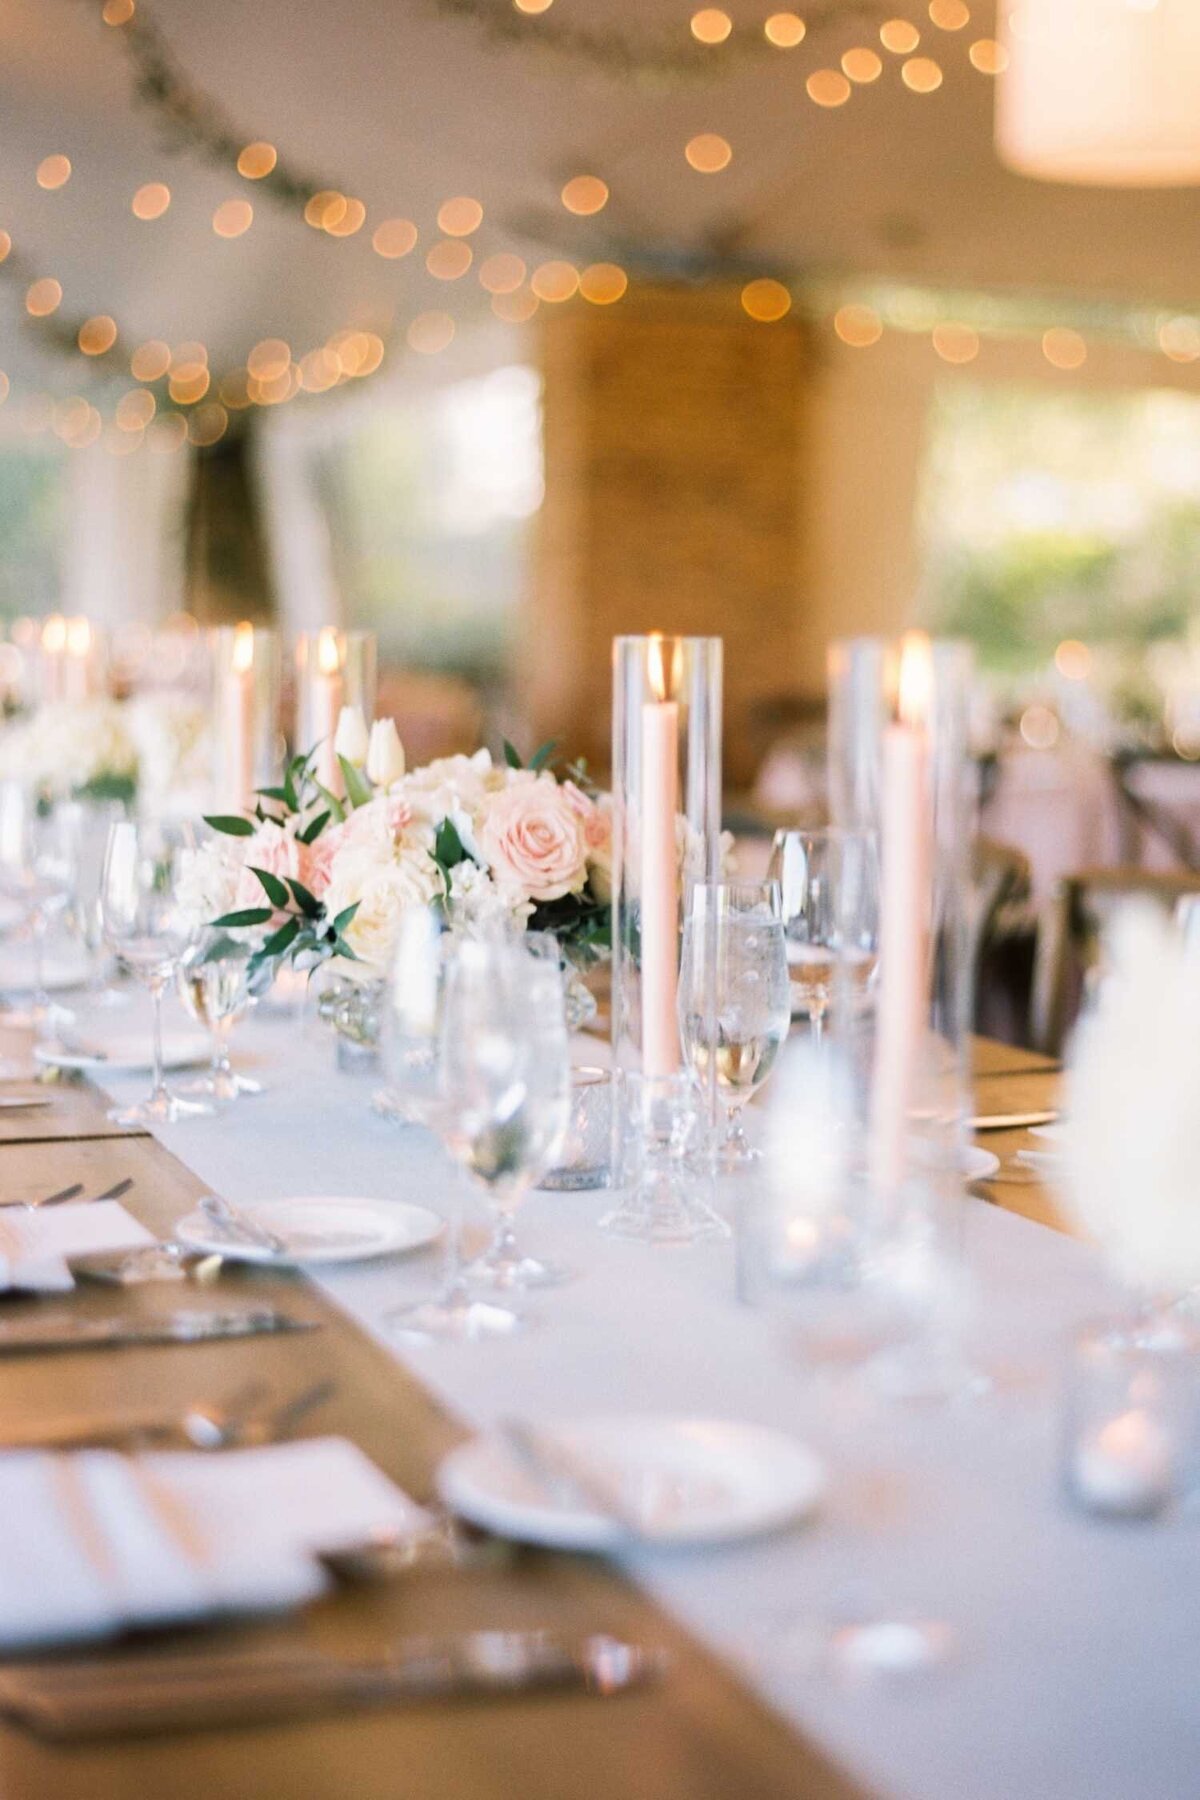 Romantic Pink and White Wedding Reception Table Design on Farm Tables at Luxury Chicago North Shore Garden Wedding Venue